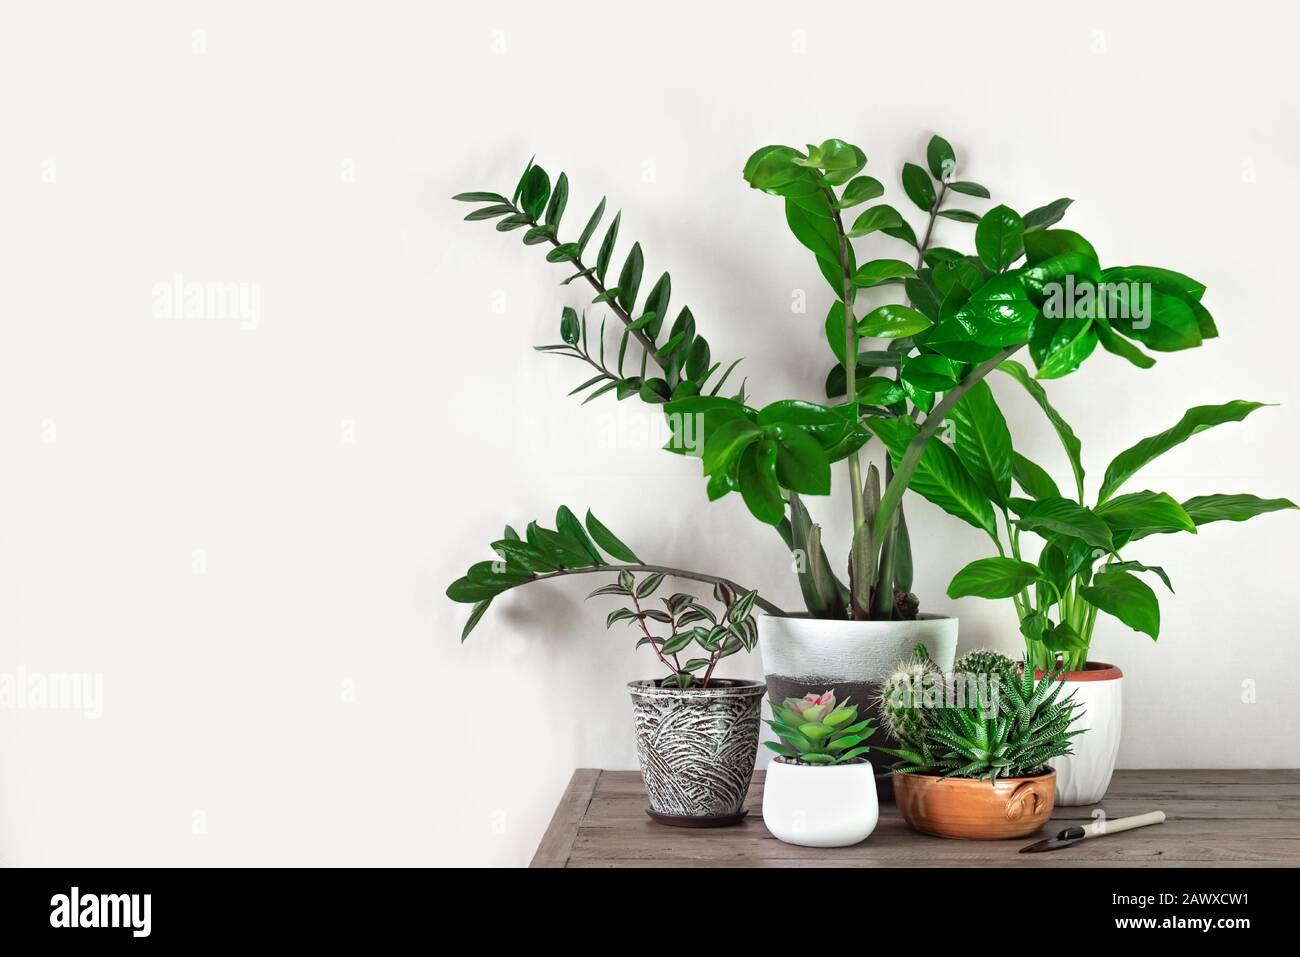 Urban jungle or home gardening concept with various potted plants, succulents, white wall, copy space. Greening home with houseplants, eco lifestyle a Stock Photo